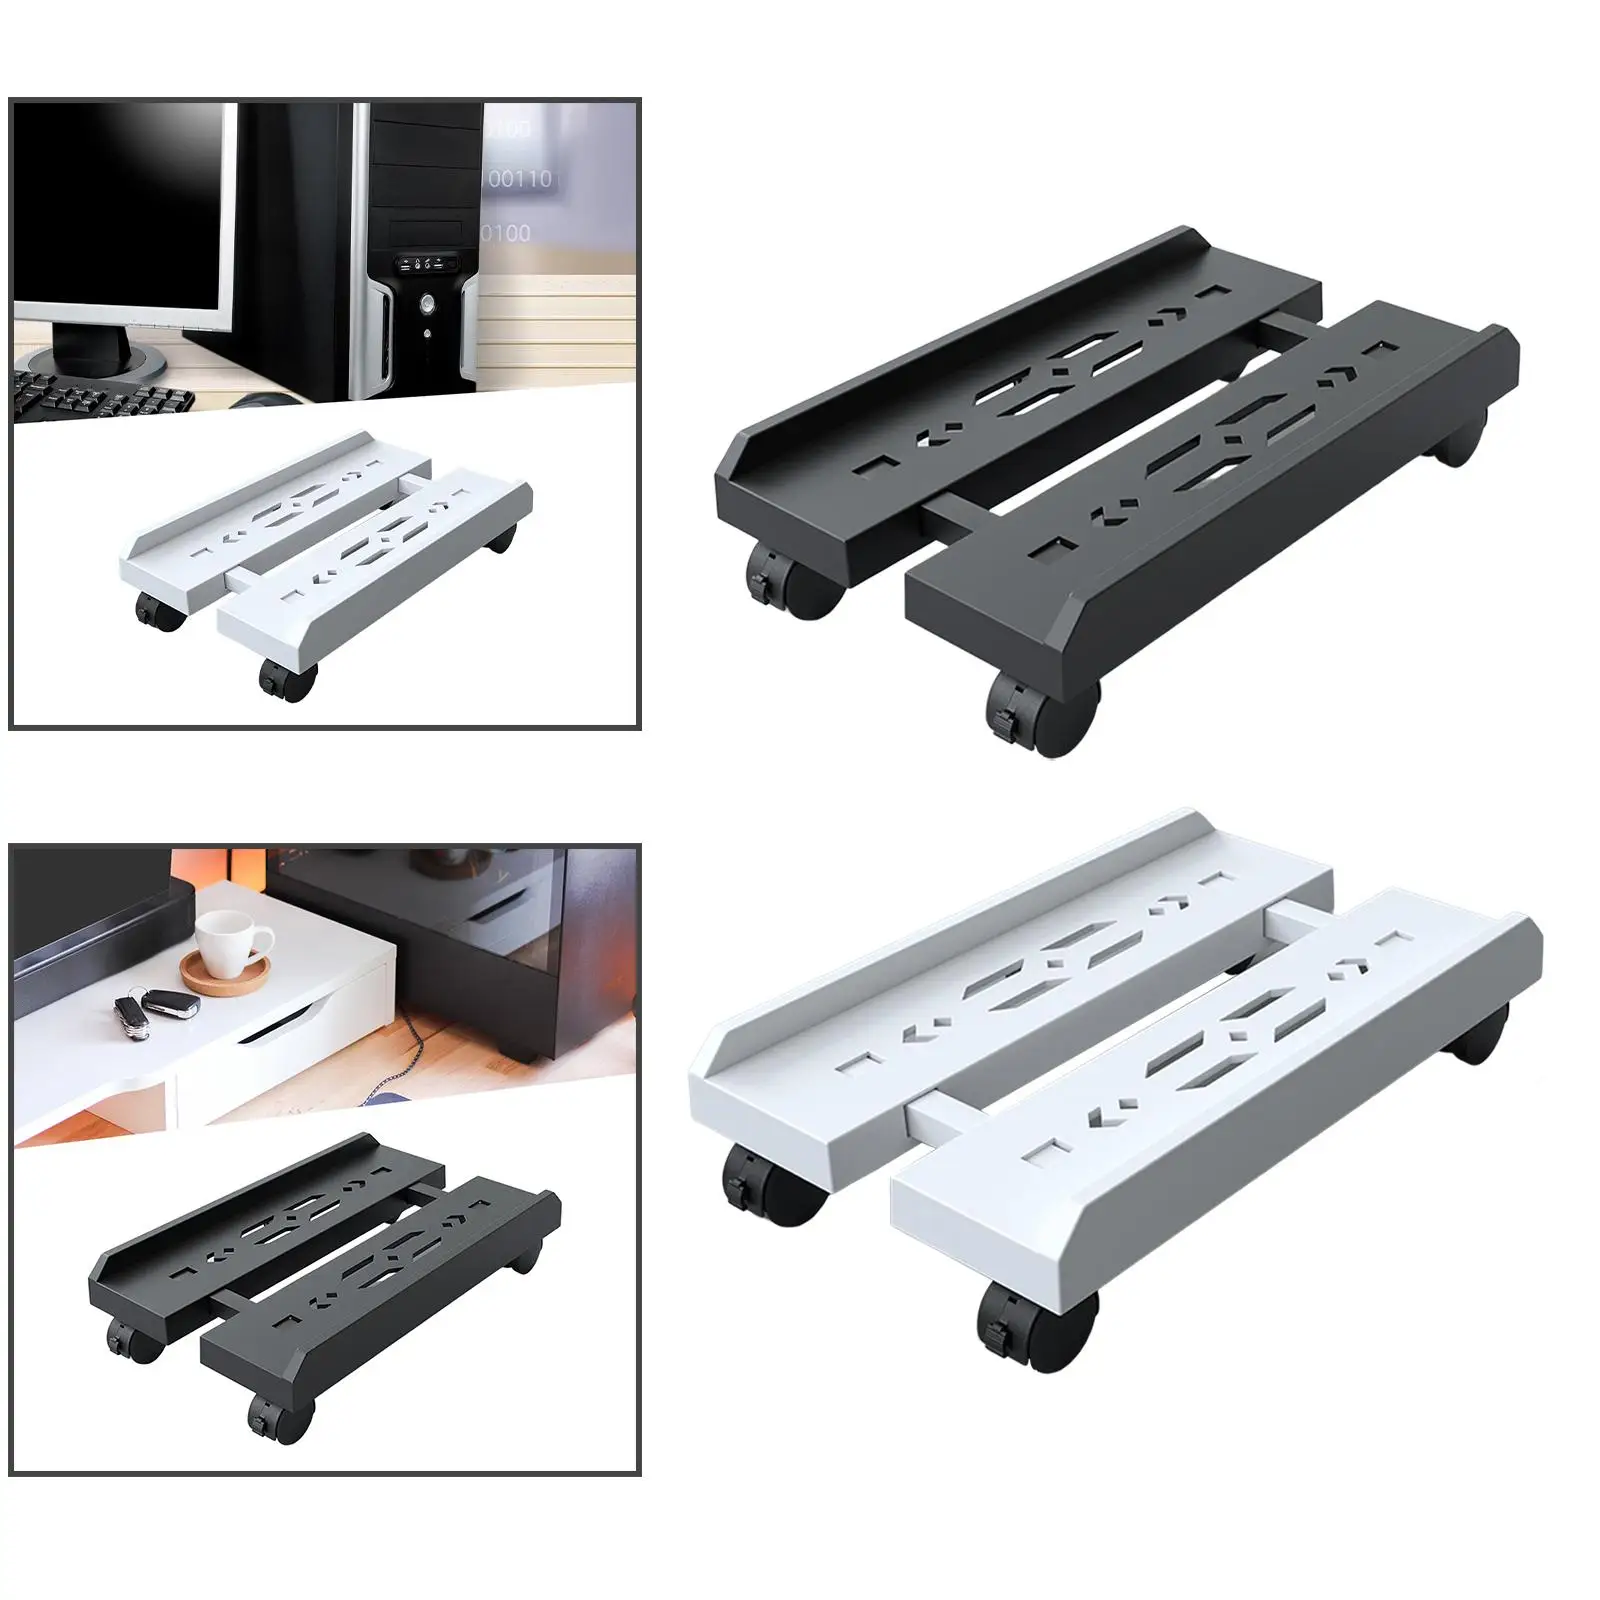 CPU Holder Stand Mobile CPU Stand PC Tower Stand PC Holder Cart Mobile Computer Tower Stand for Gaming PC under Desk Home Office